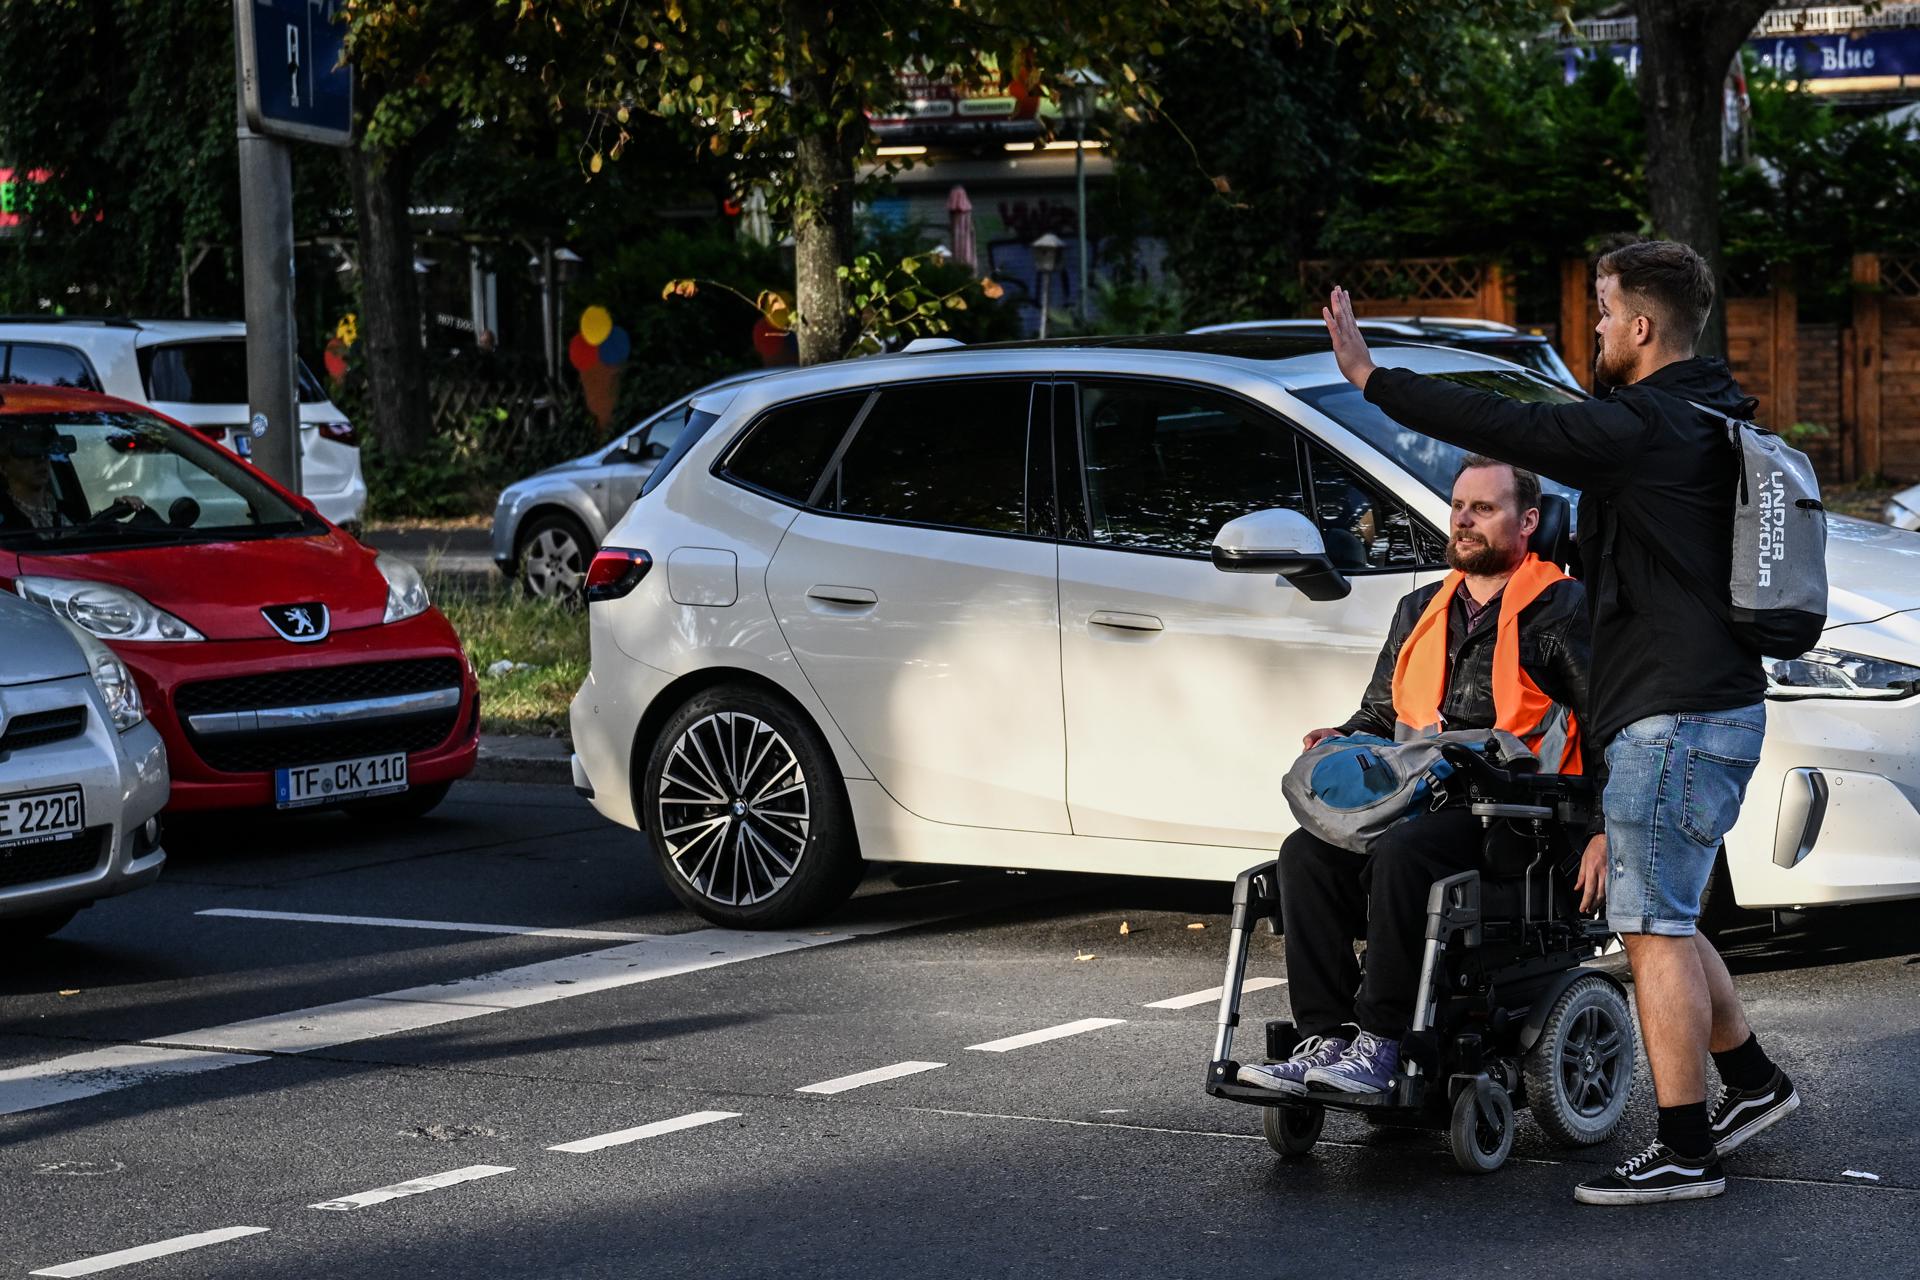 A police officer (R) in mufti gestures to stop drivers as he arrests an activist, on a motorised wheelchair, of the Last Generation climate activism group from a street in Berlin, Germany, 18 September 2023. EFE/EPA/FILIP SINGER